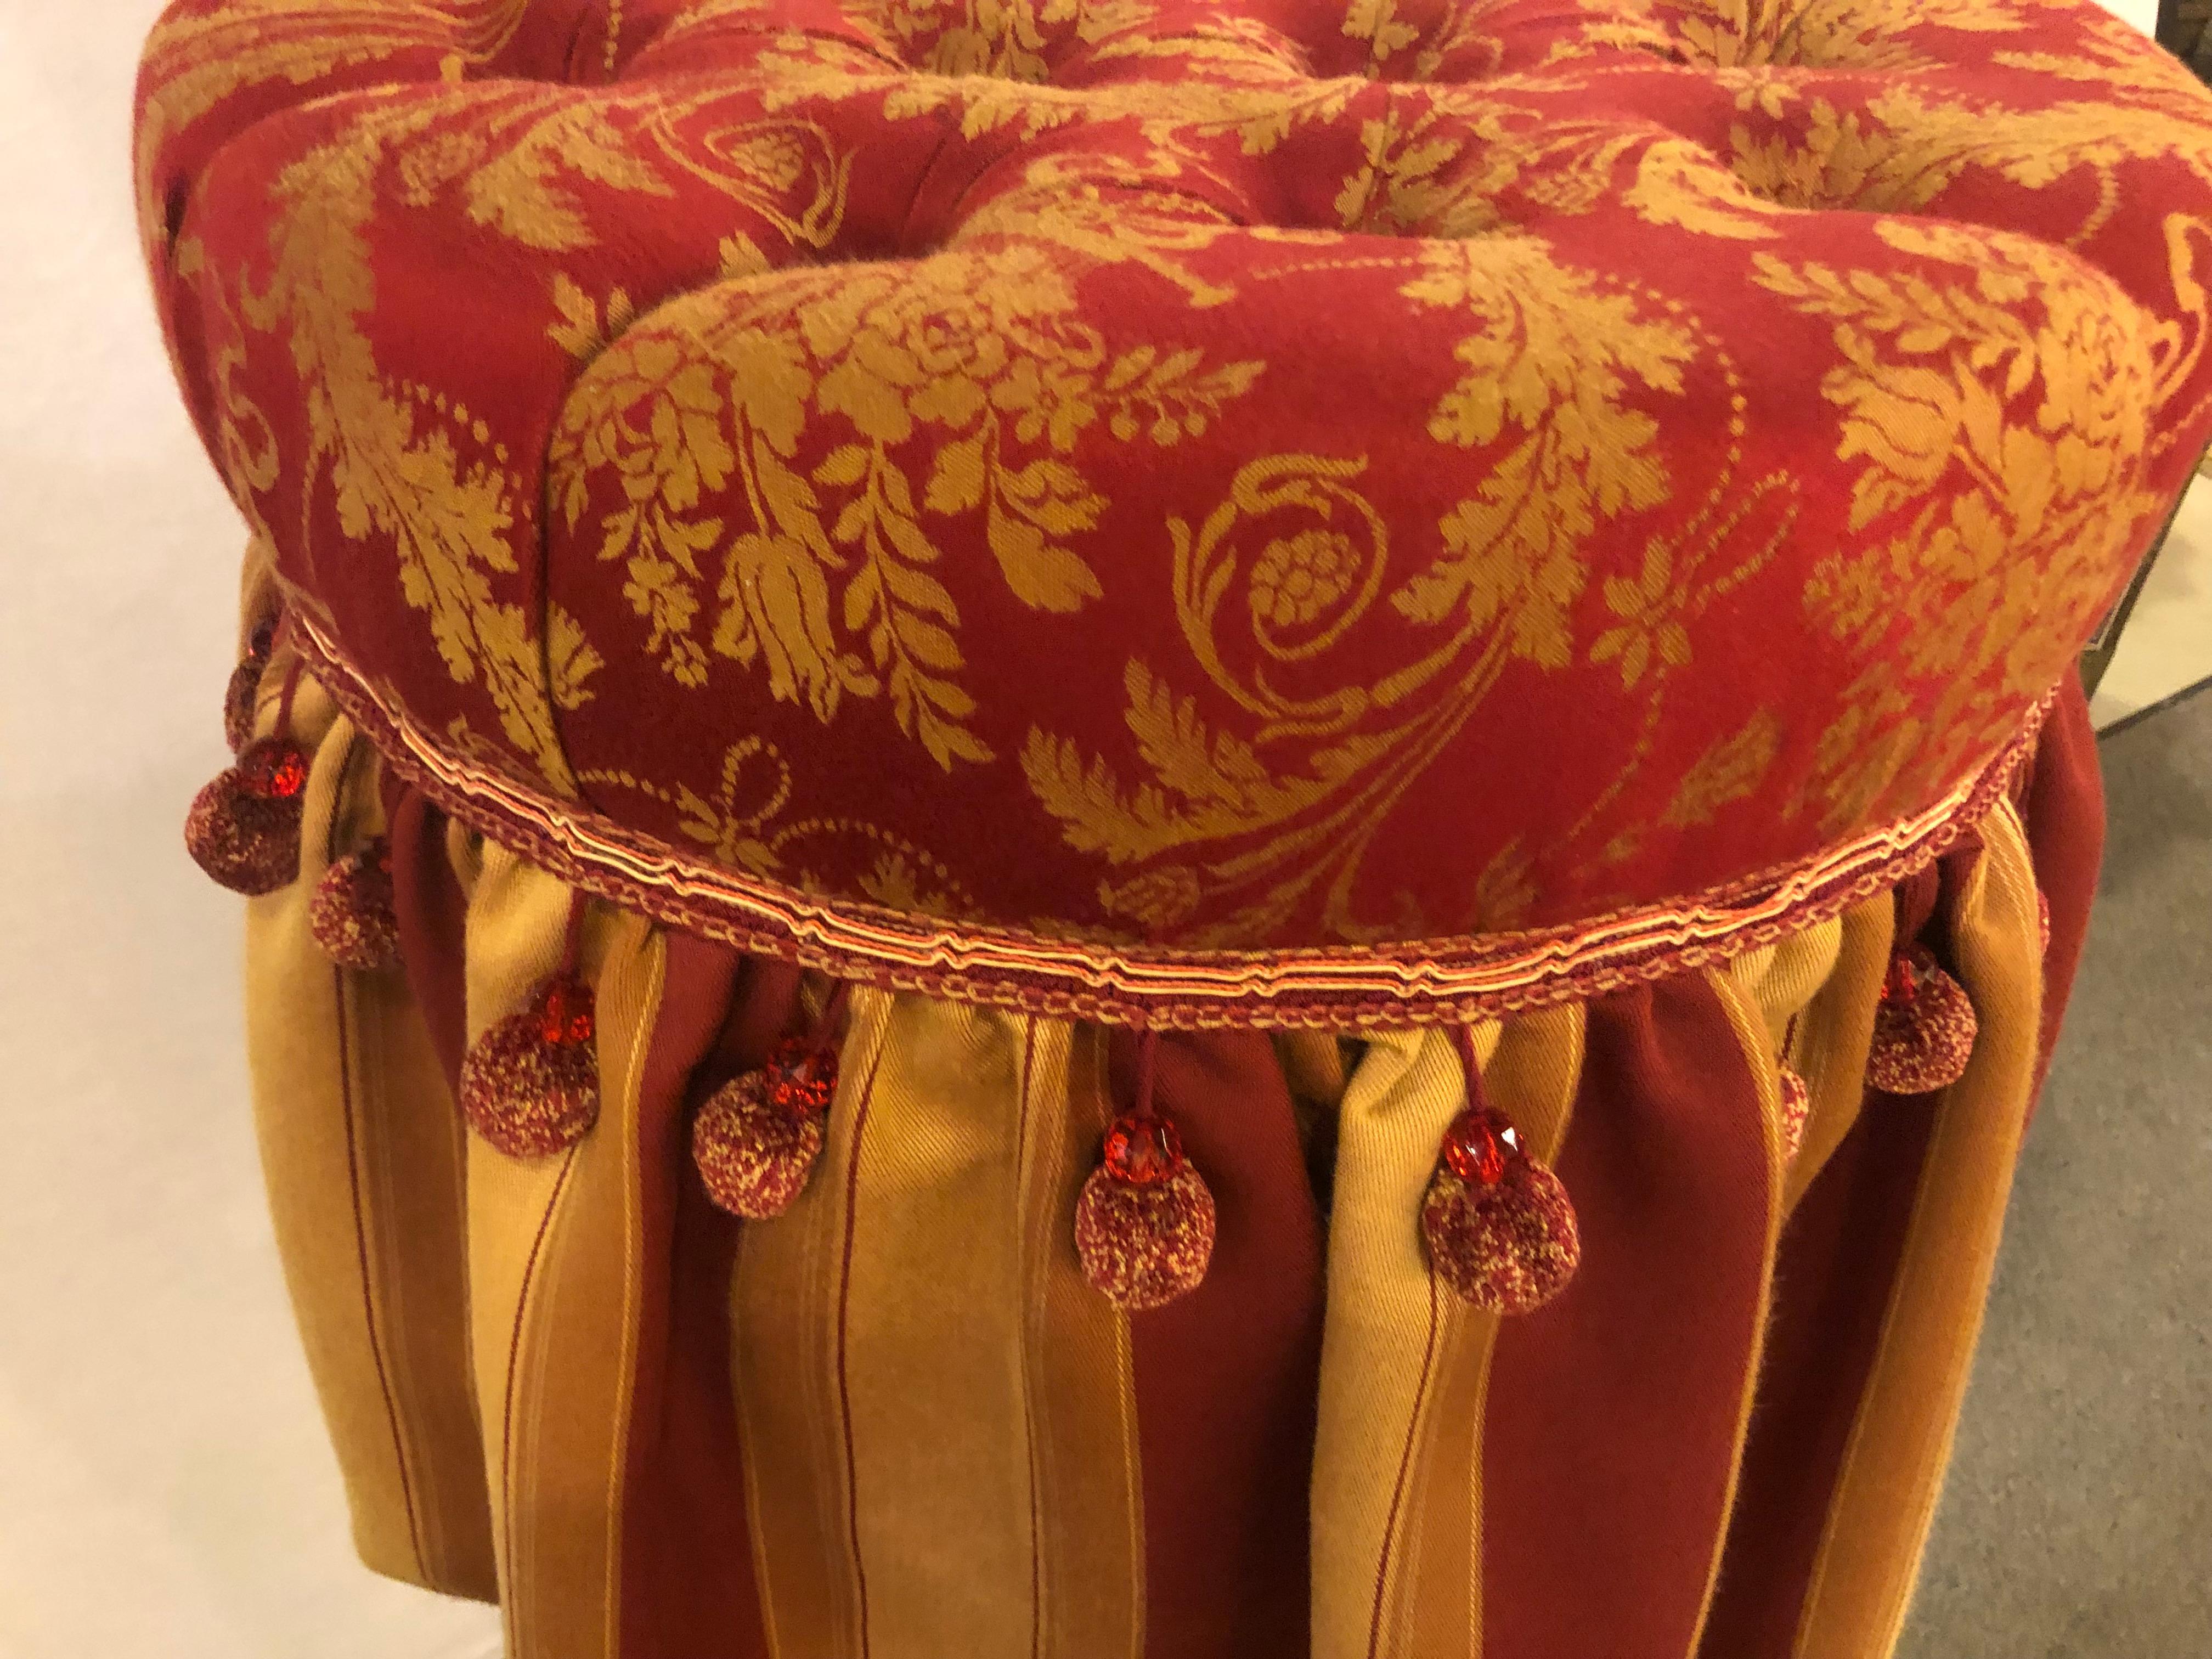 20th Century Deco Upholstered Tufted Red and Gilt Decorated Ottoman or Footstool